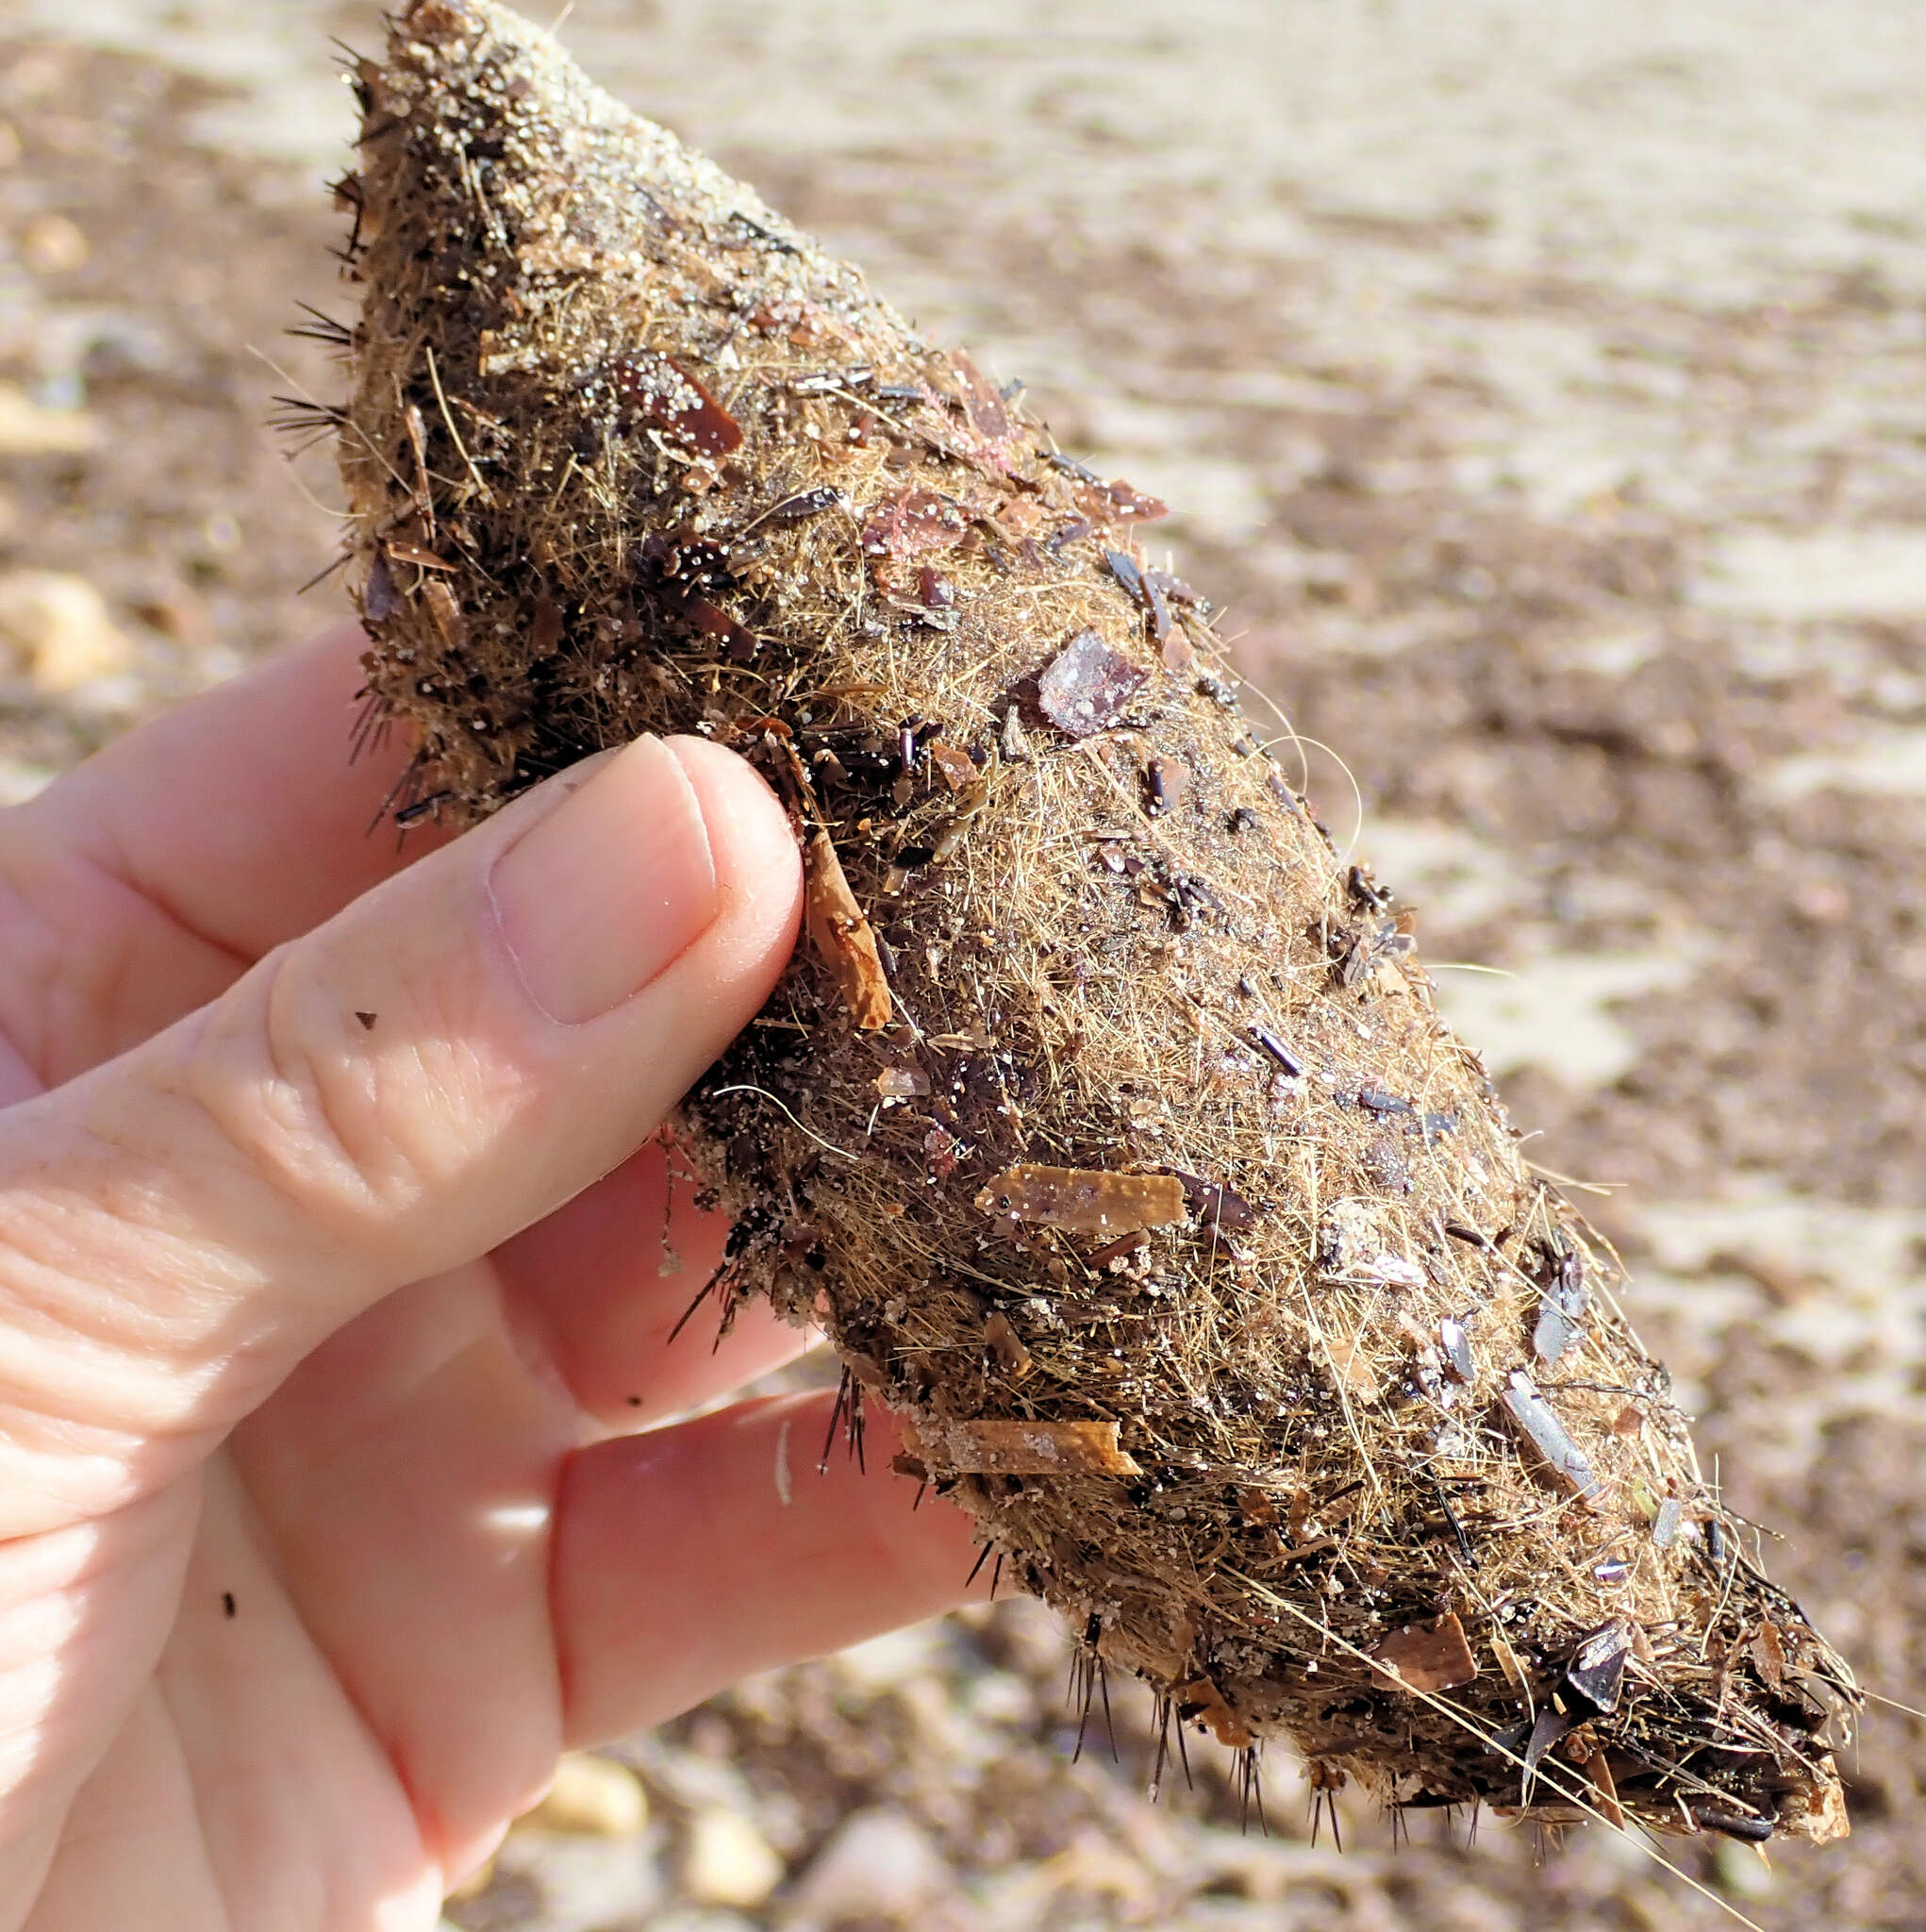 Image of Southern sea mouse